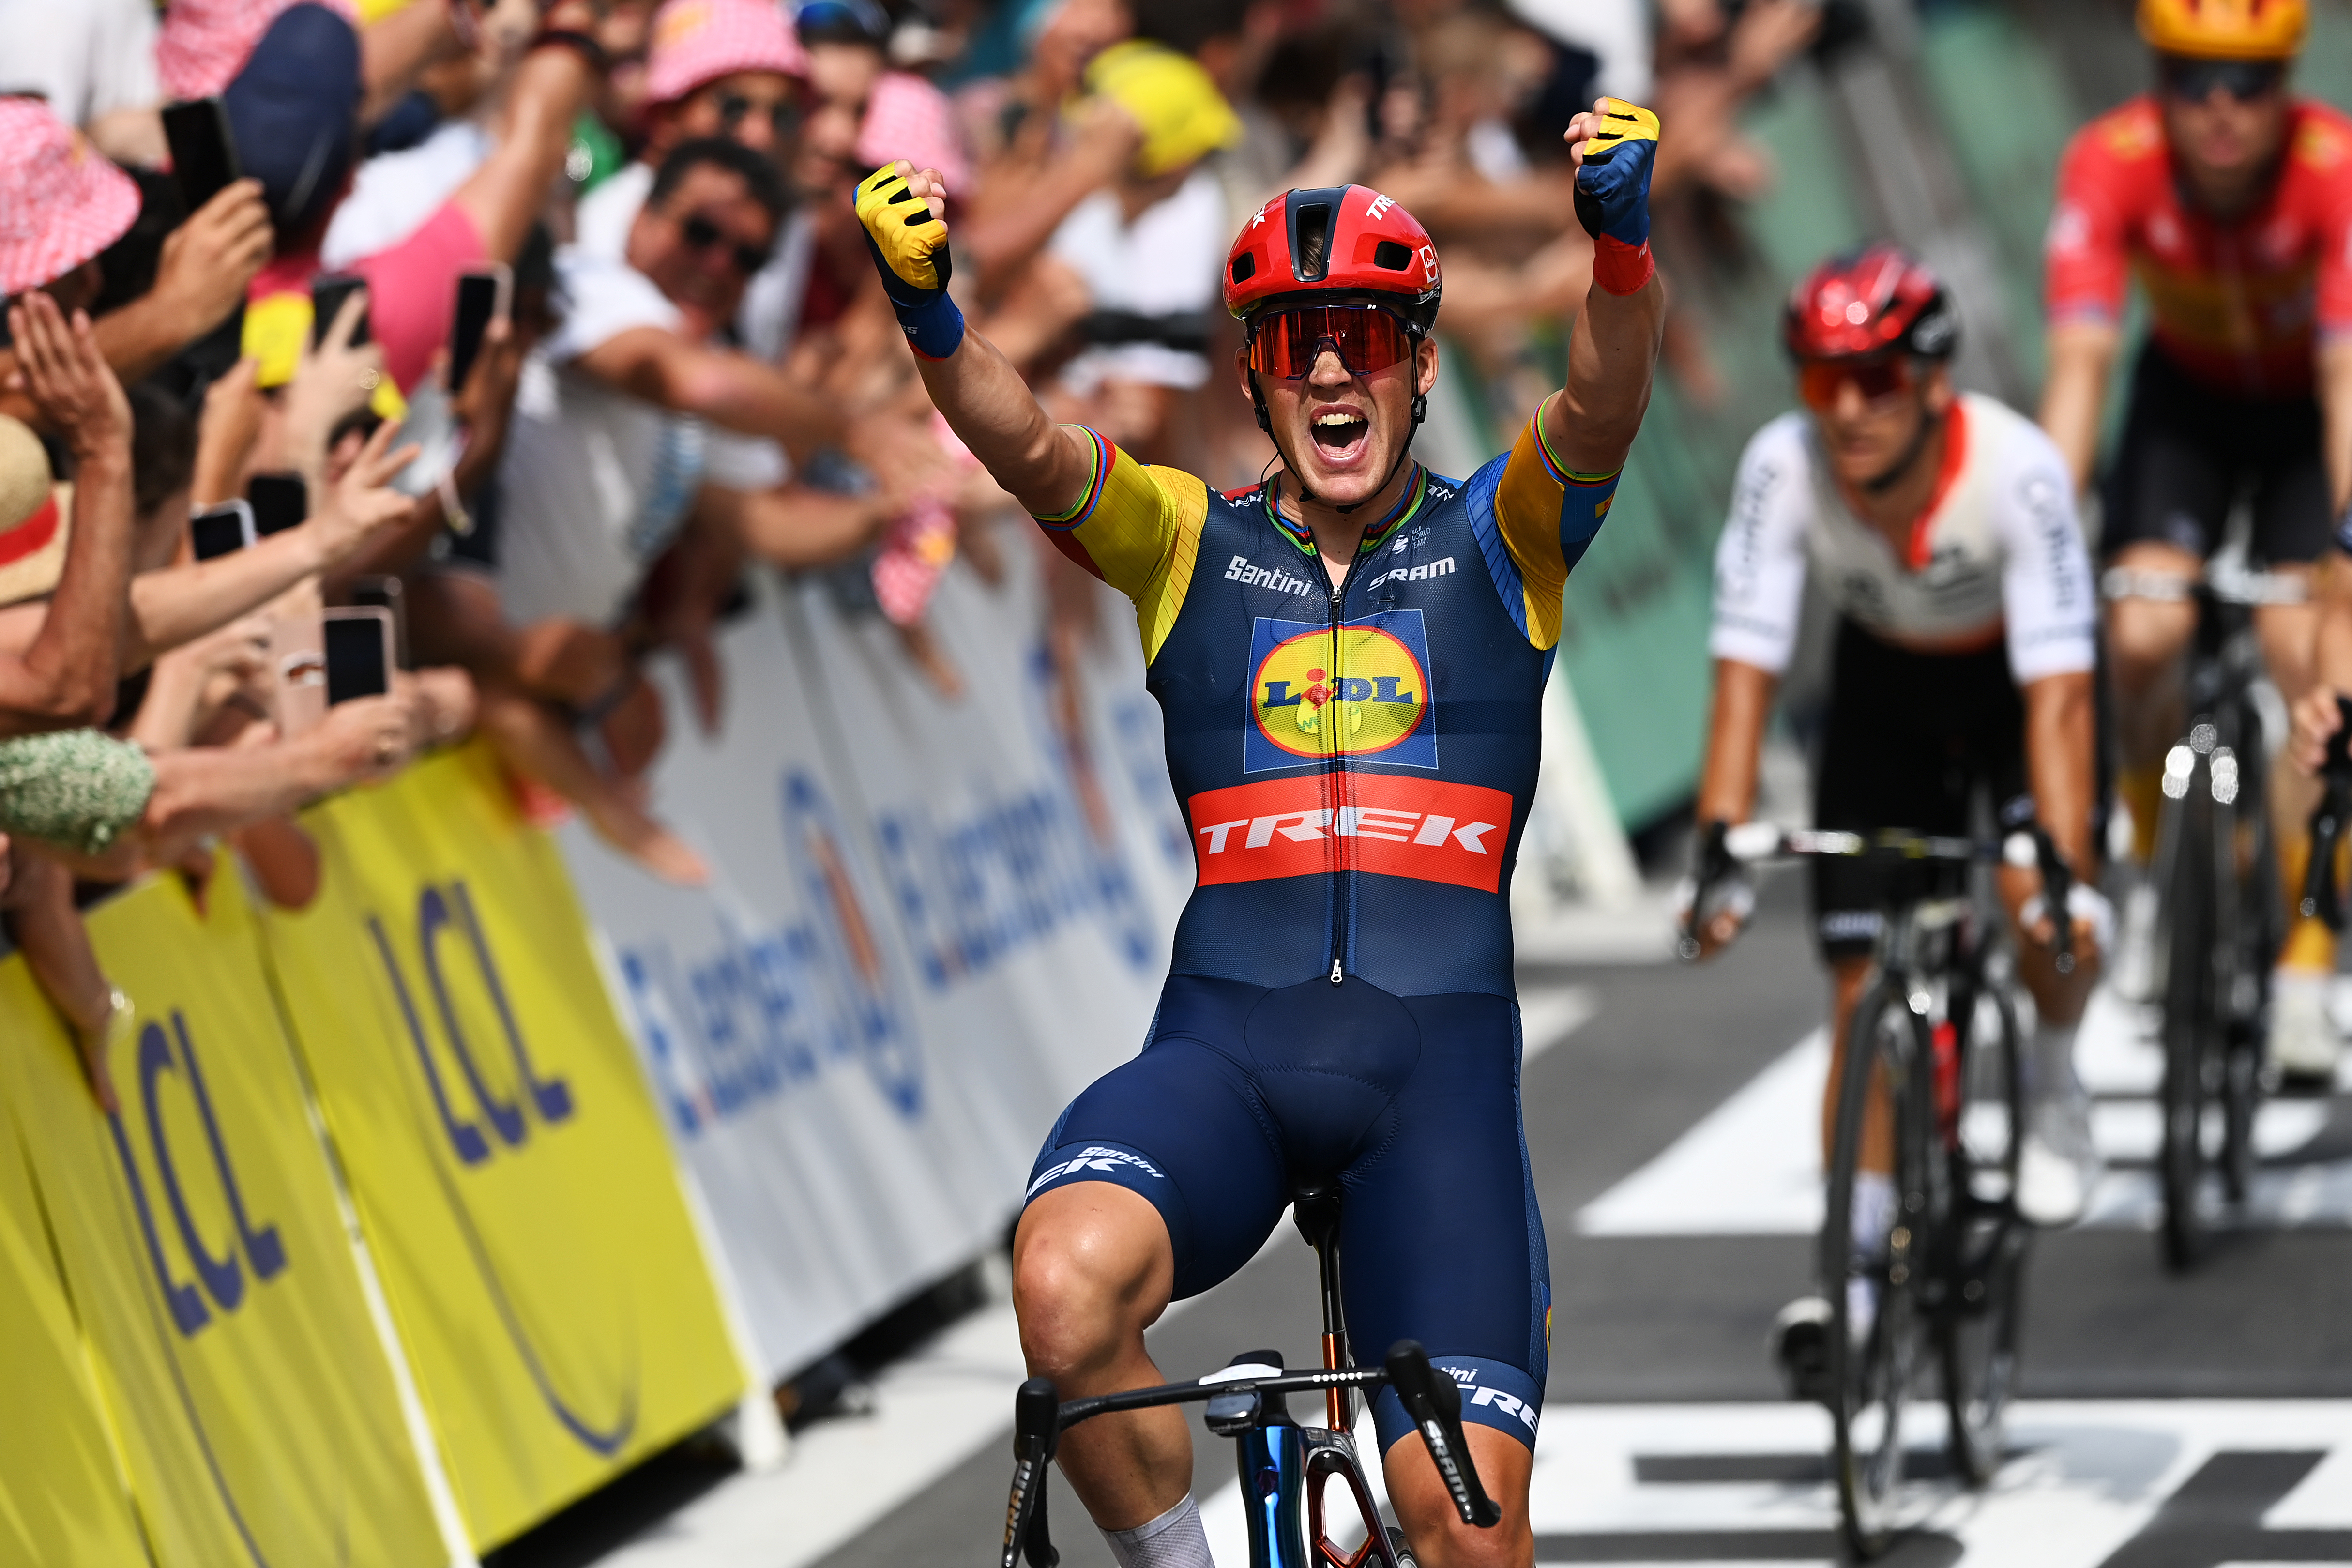 Mads Pedersen of Denmark and Team Lidl-Trek celebrates at finish line as stage winner during the stage eight of the 110th Tour de France 2023 a 200.7km stage from Libourne to Limoges / #UCIWT / on July 08, 2023 in Limoges, France.